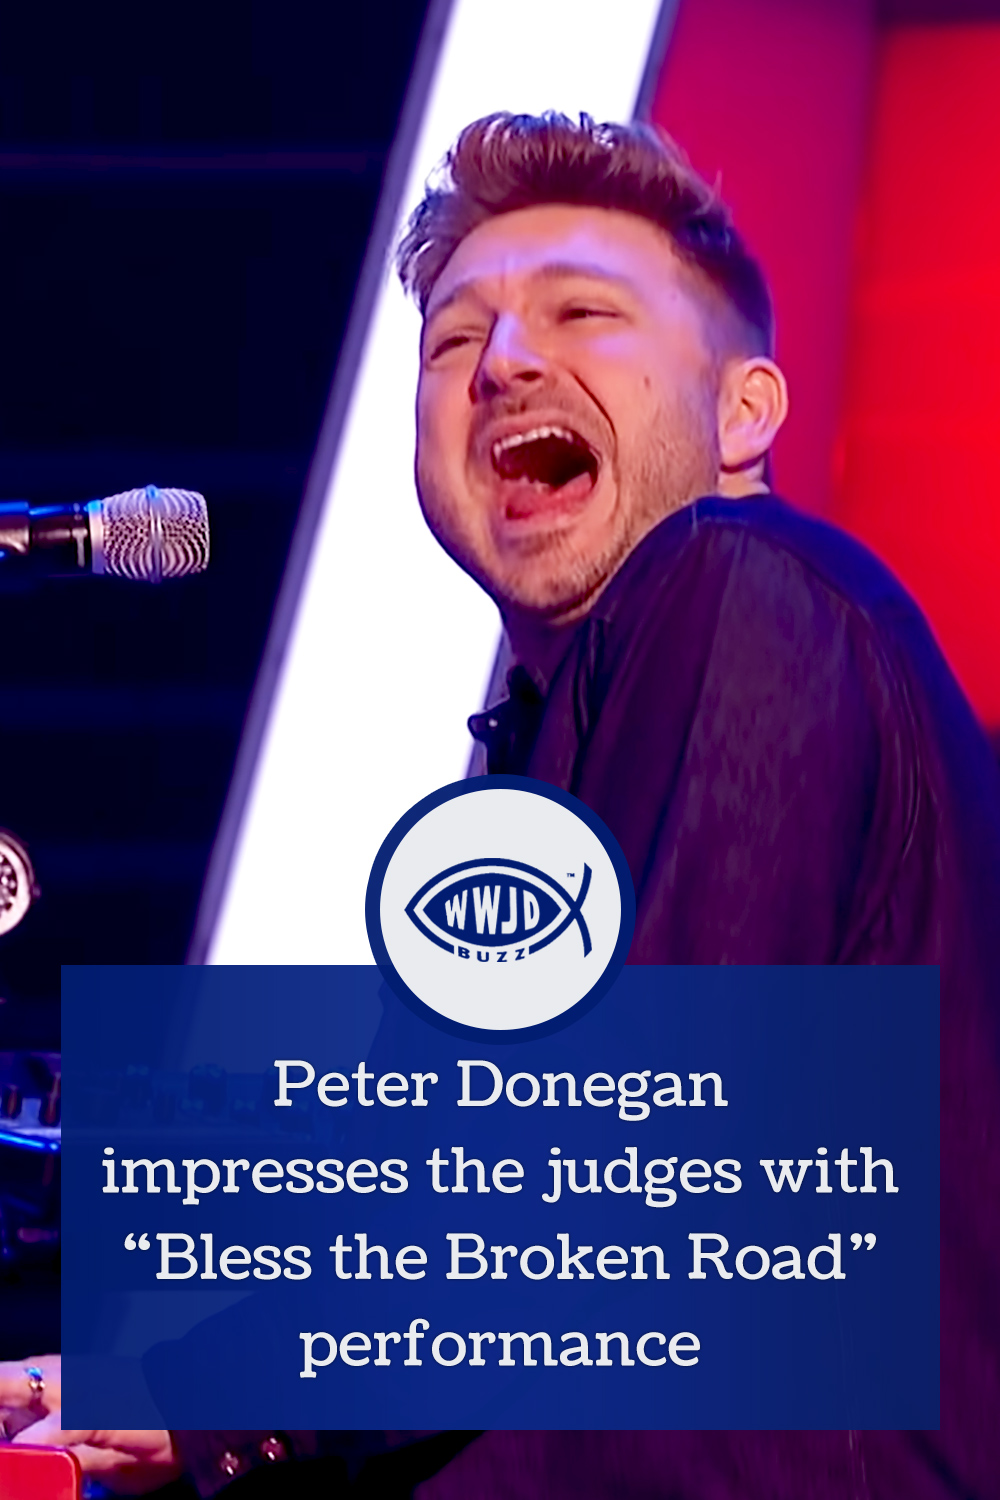 Peter Donegan impresses the judges with “Bless the Broken Road” performance